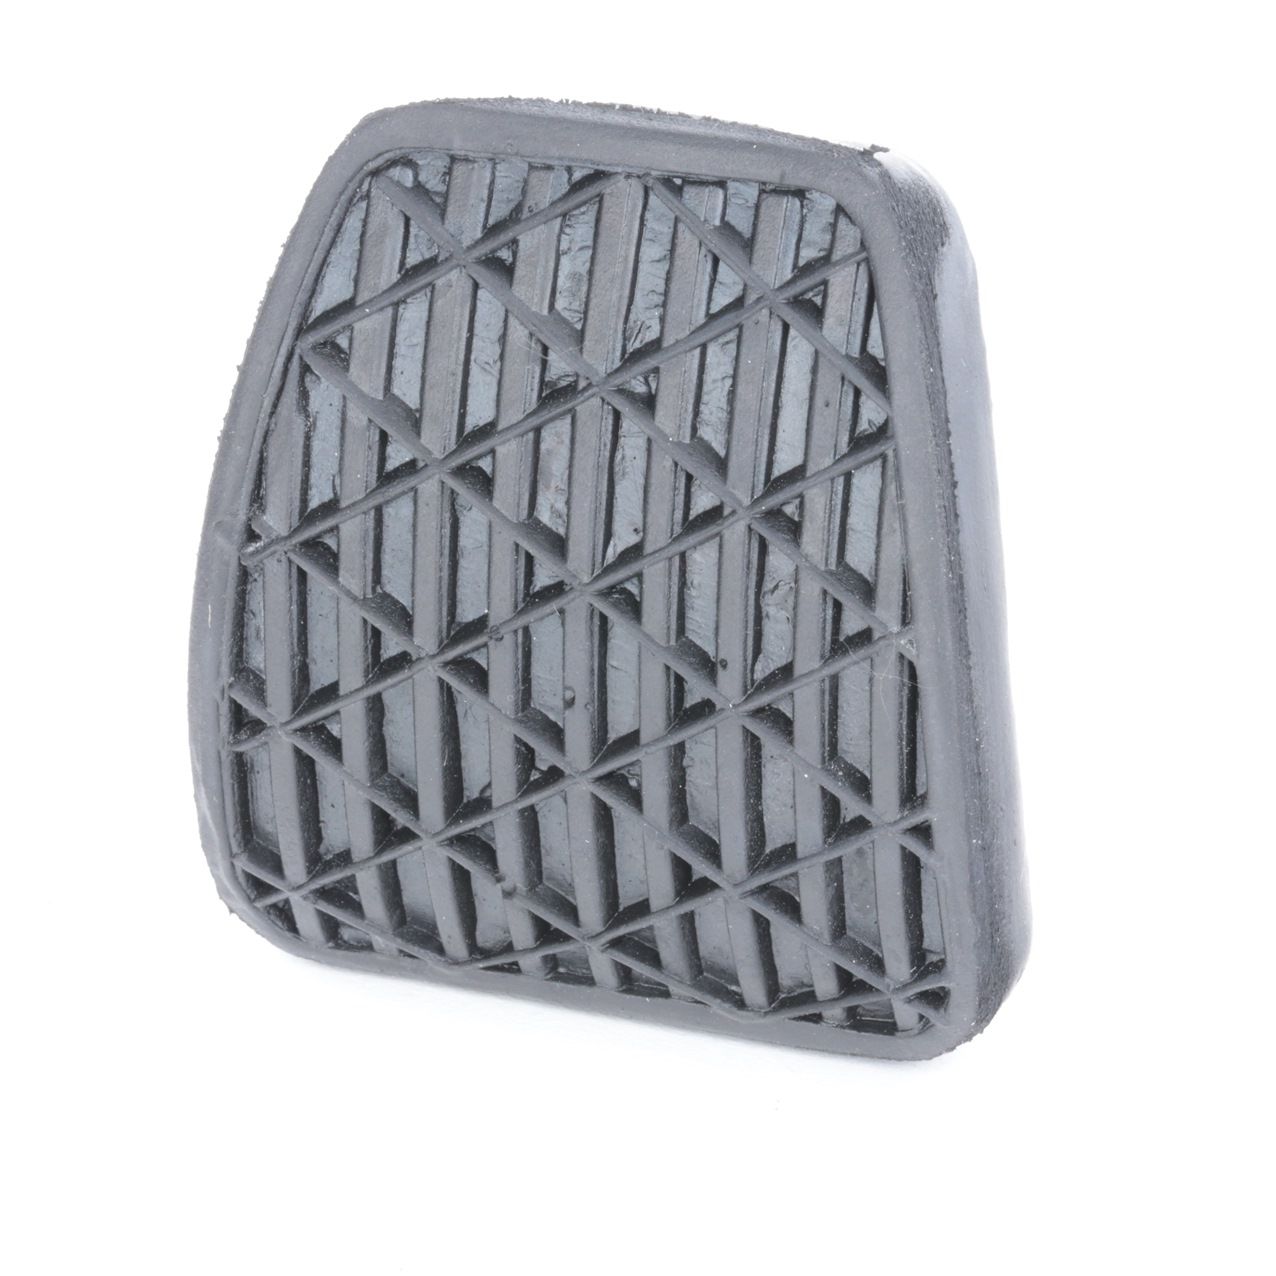 Image of FEBI BILSTEIN Pedal Covers MERCEDES-BENZ,SMART 07534 2012920082,A2012920082,2012920082 Pedal Pads,Pedal Lining, brake pedal A2012920082